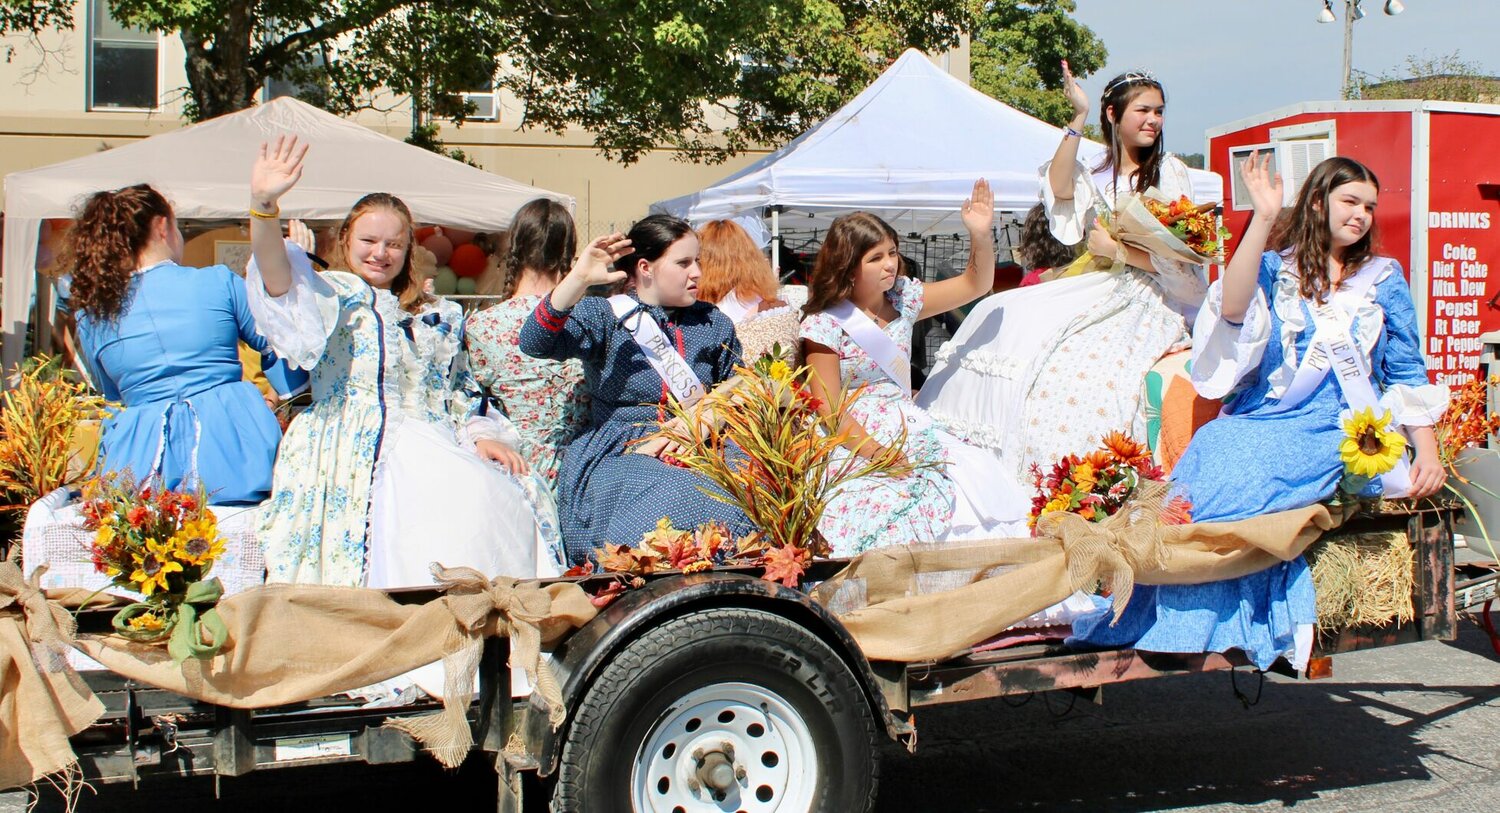 The 2023 Hootin' an Hollarin' Queen MaryJane Flygare, at second from right, and her court gave their best princess waves during the parade. Deputy Queen is Carrie Richer and princesses are Emily McClure, Lakely Anderson, and Cheyenne Wachtel. Miss Sweetie Pie is Joslyne Trout, at far right.